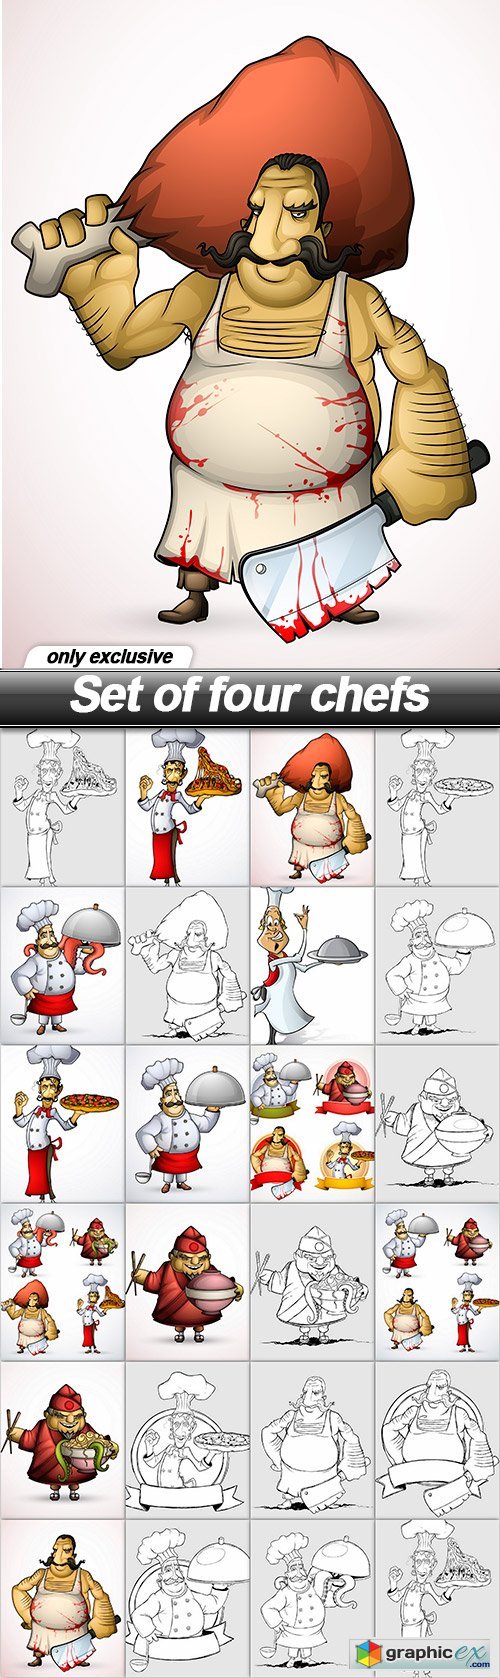 Set of four chefs - 23 EPS